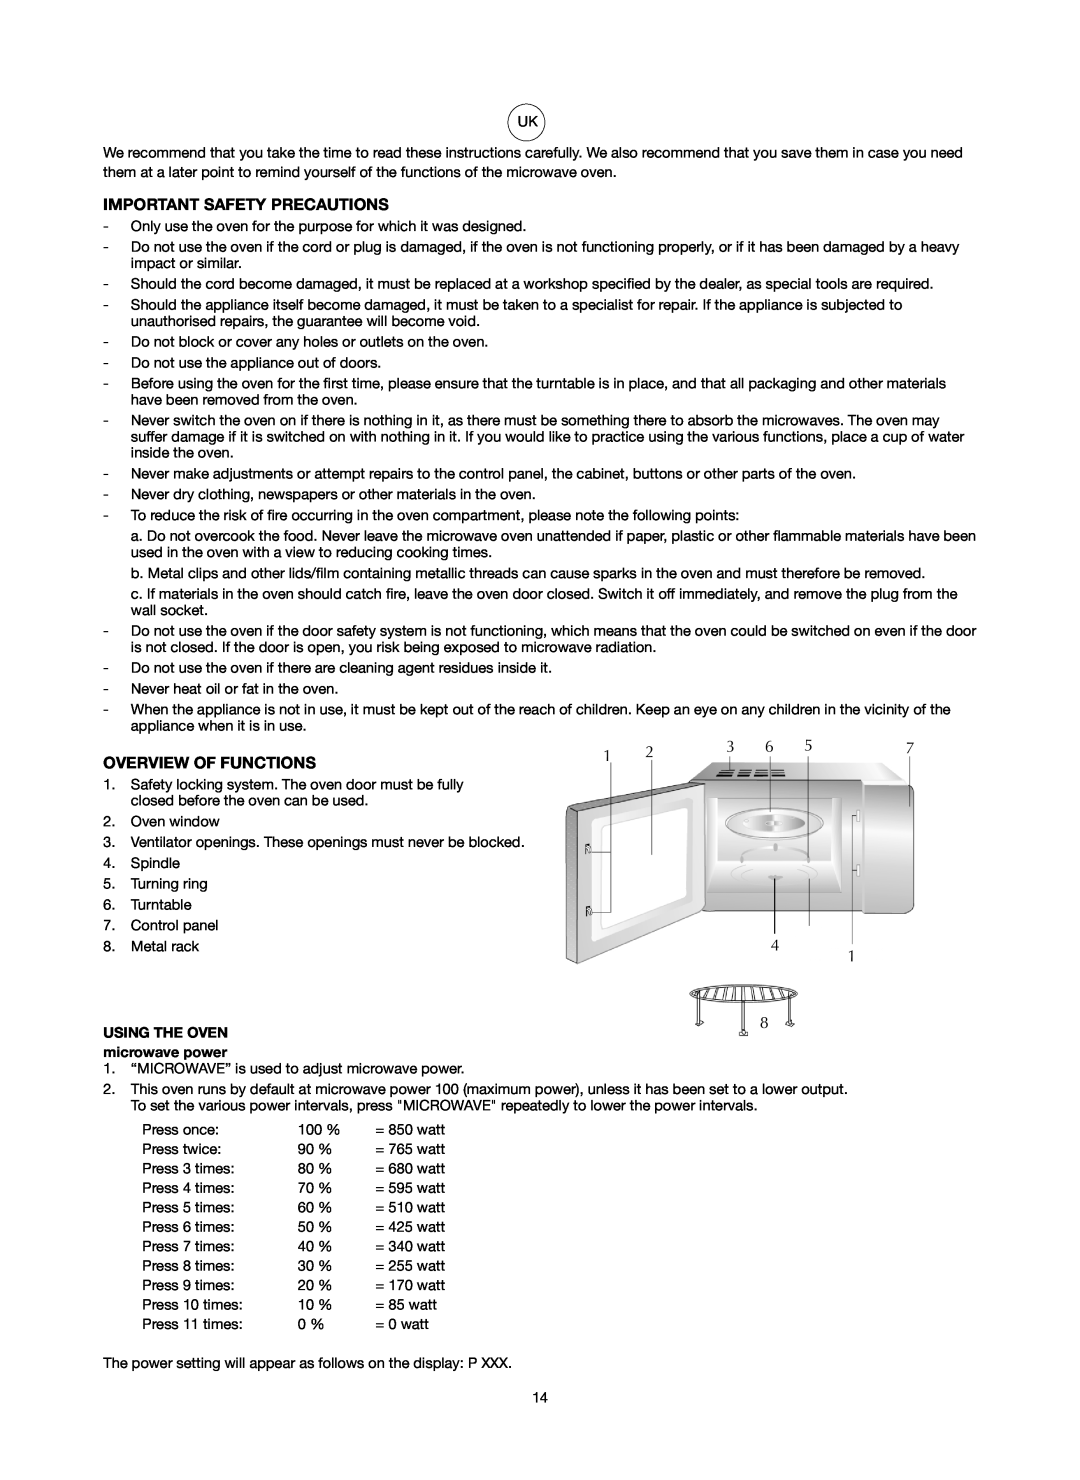 Melissa ED8525S-SA manual Important Safety Precautions, Overview Of Functions, USING THE OVEN microwave power 